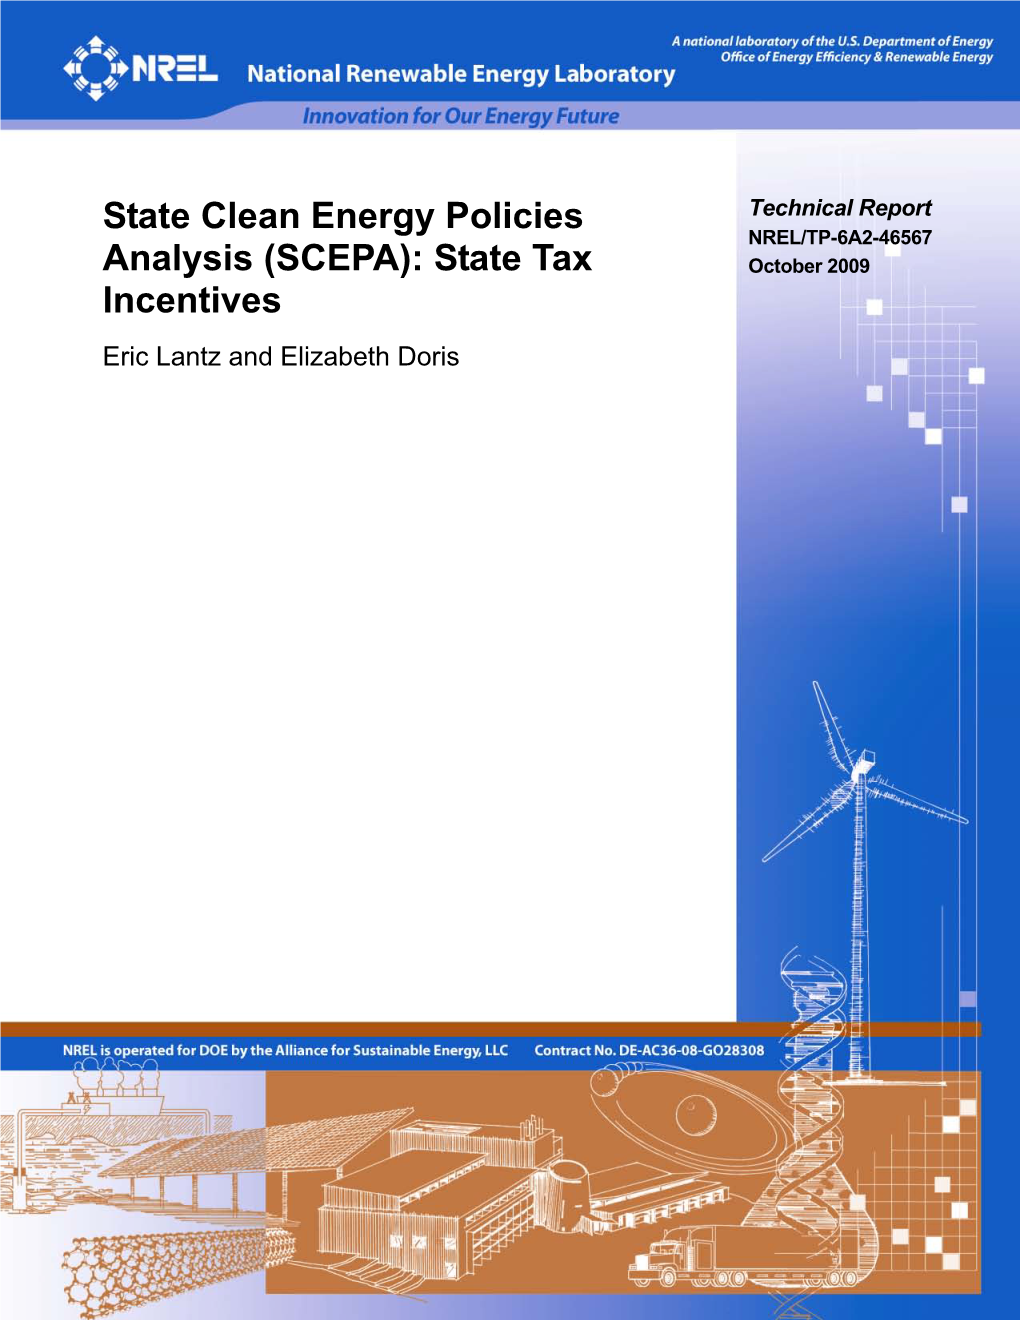 State Clean Energy Policies Analysis (SCEPA): State Tax Incentives